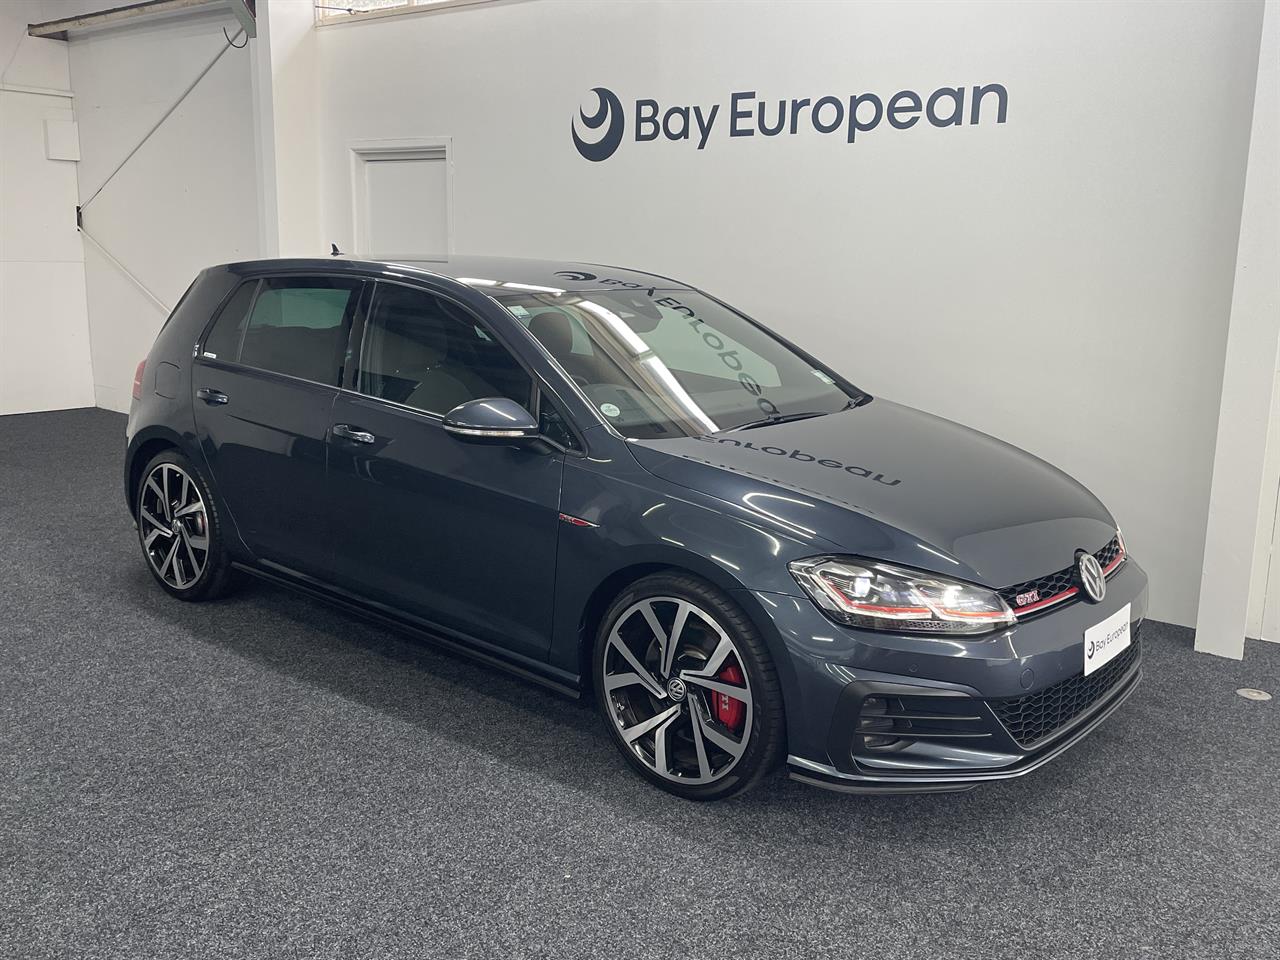 Cars & Vehicles  Cars : 2017 Volkswagen Golf GTi Performance Edition 180kW